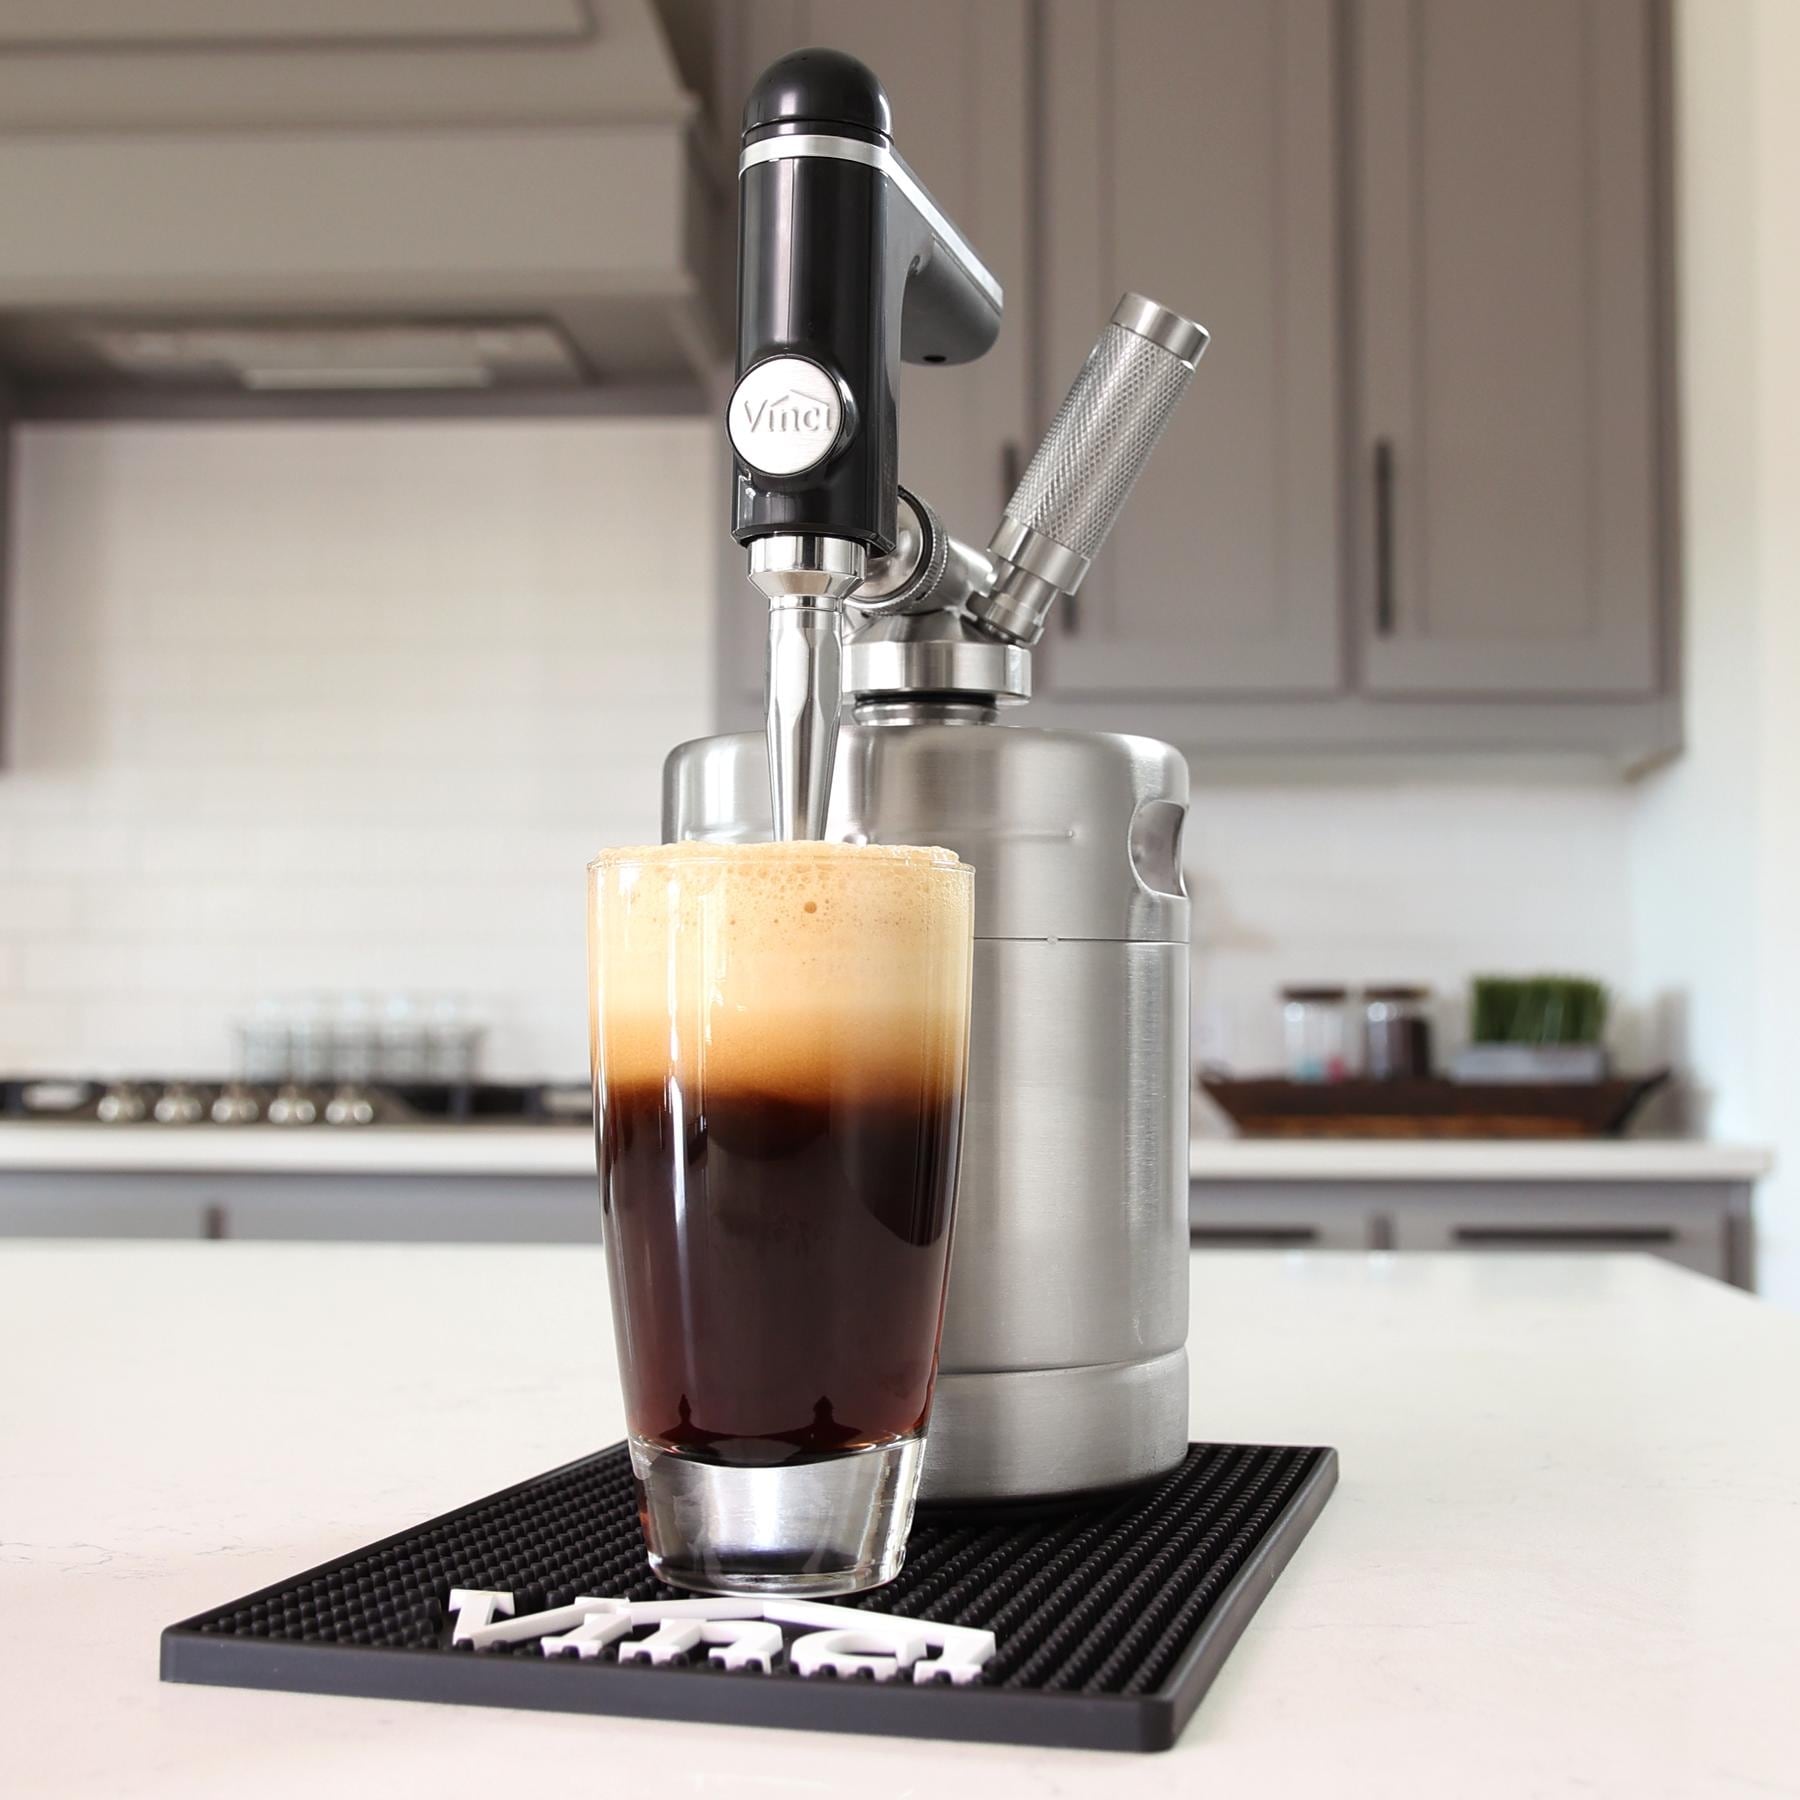 https://ak1.ostkcdn.com/images/products/is/images/direct/108547ed85c4070d13c9809c8c2564d57c8d6674/Vinci-Nitro-Cold-Brew-Maker-Stainless-Steel-Home-Brew-Nitrogen-Infusion-Coffee-Keg-System-EZ-Dispensing-System-Includes-Drip-Mat.jpg